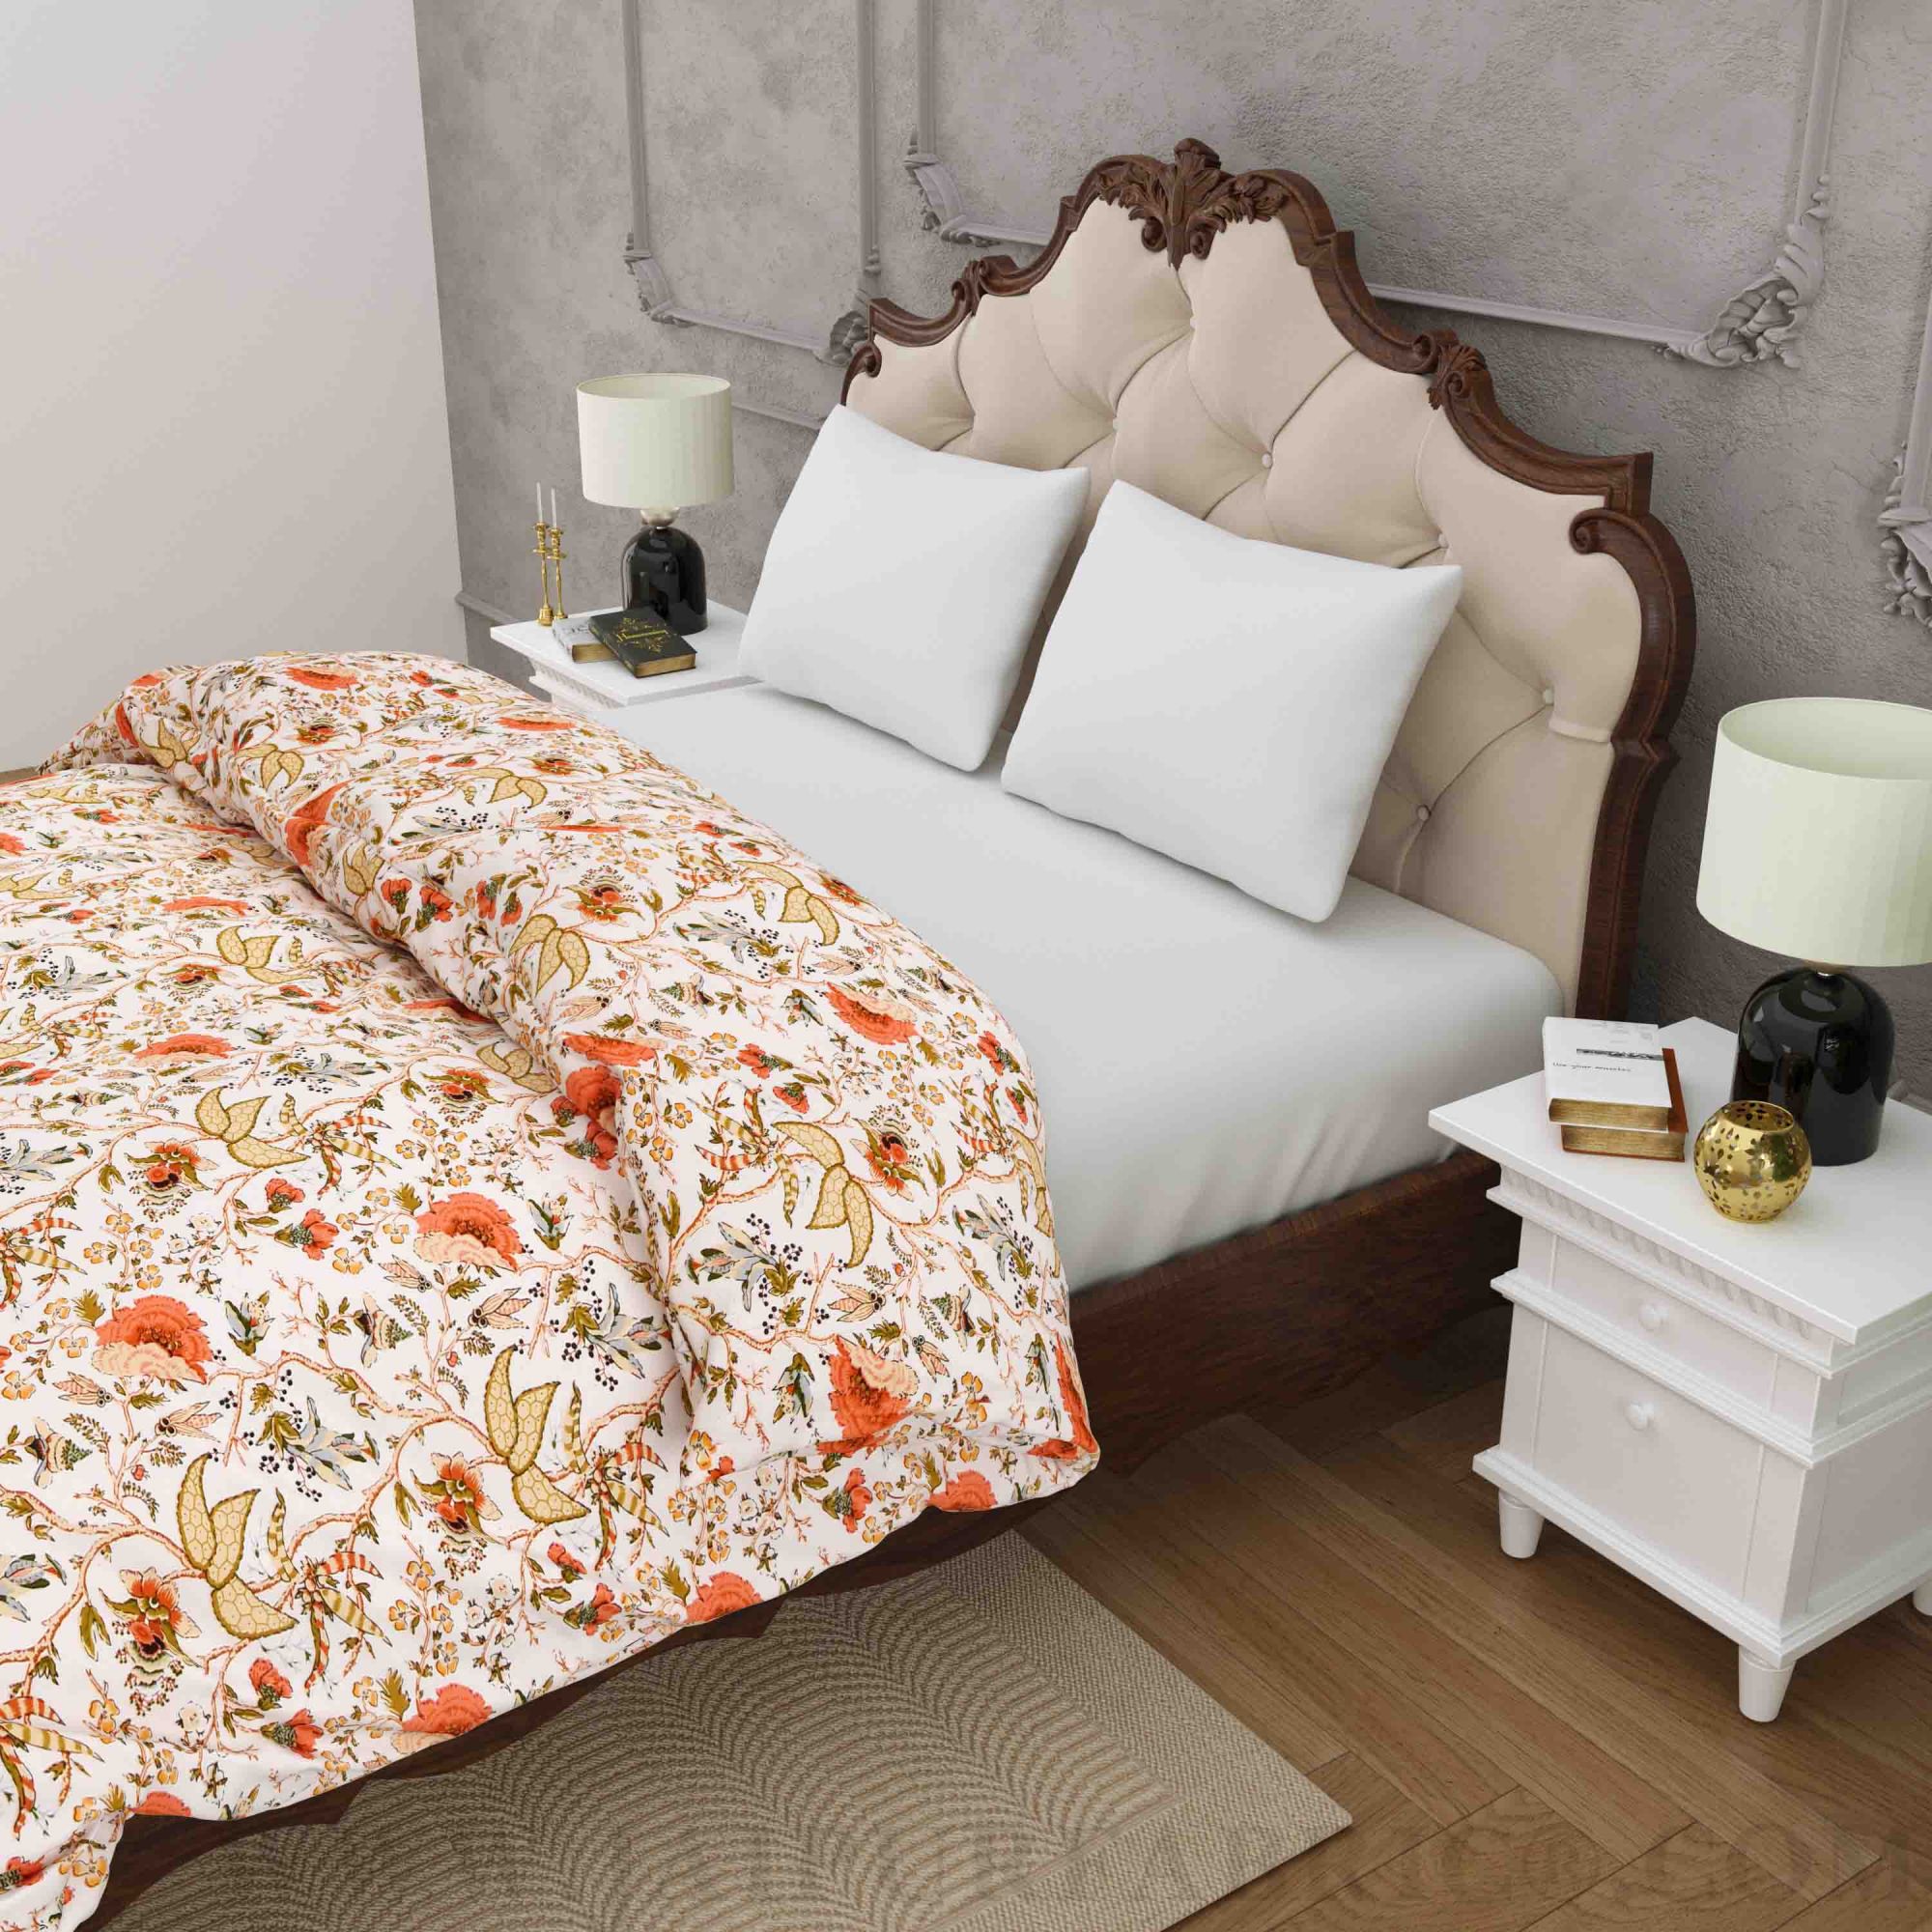 JaipurFabric® Anokhi Print Peachy Floral Double Bed Comforter